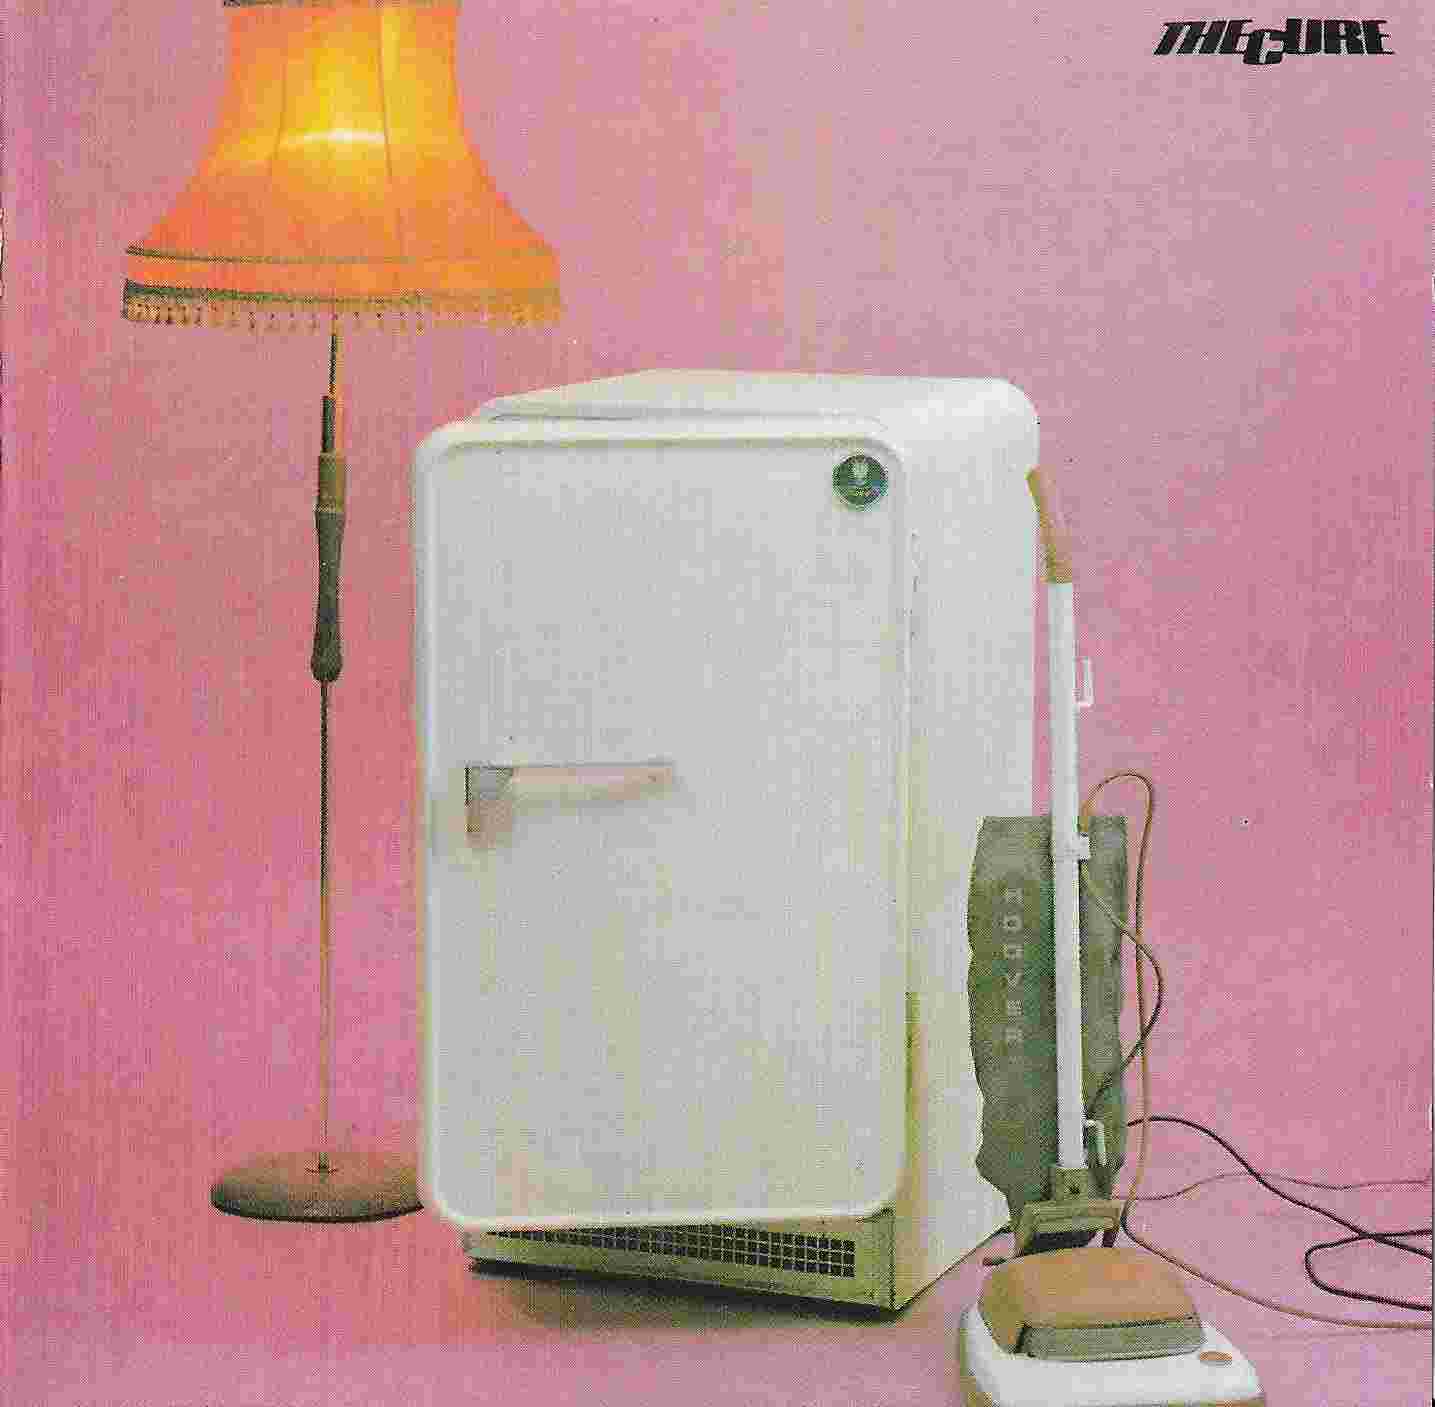 Picture of Three imaginary boys by artist The Cure 